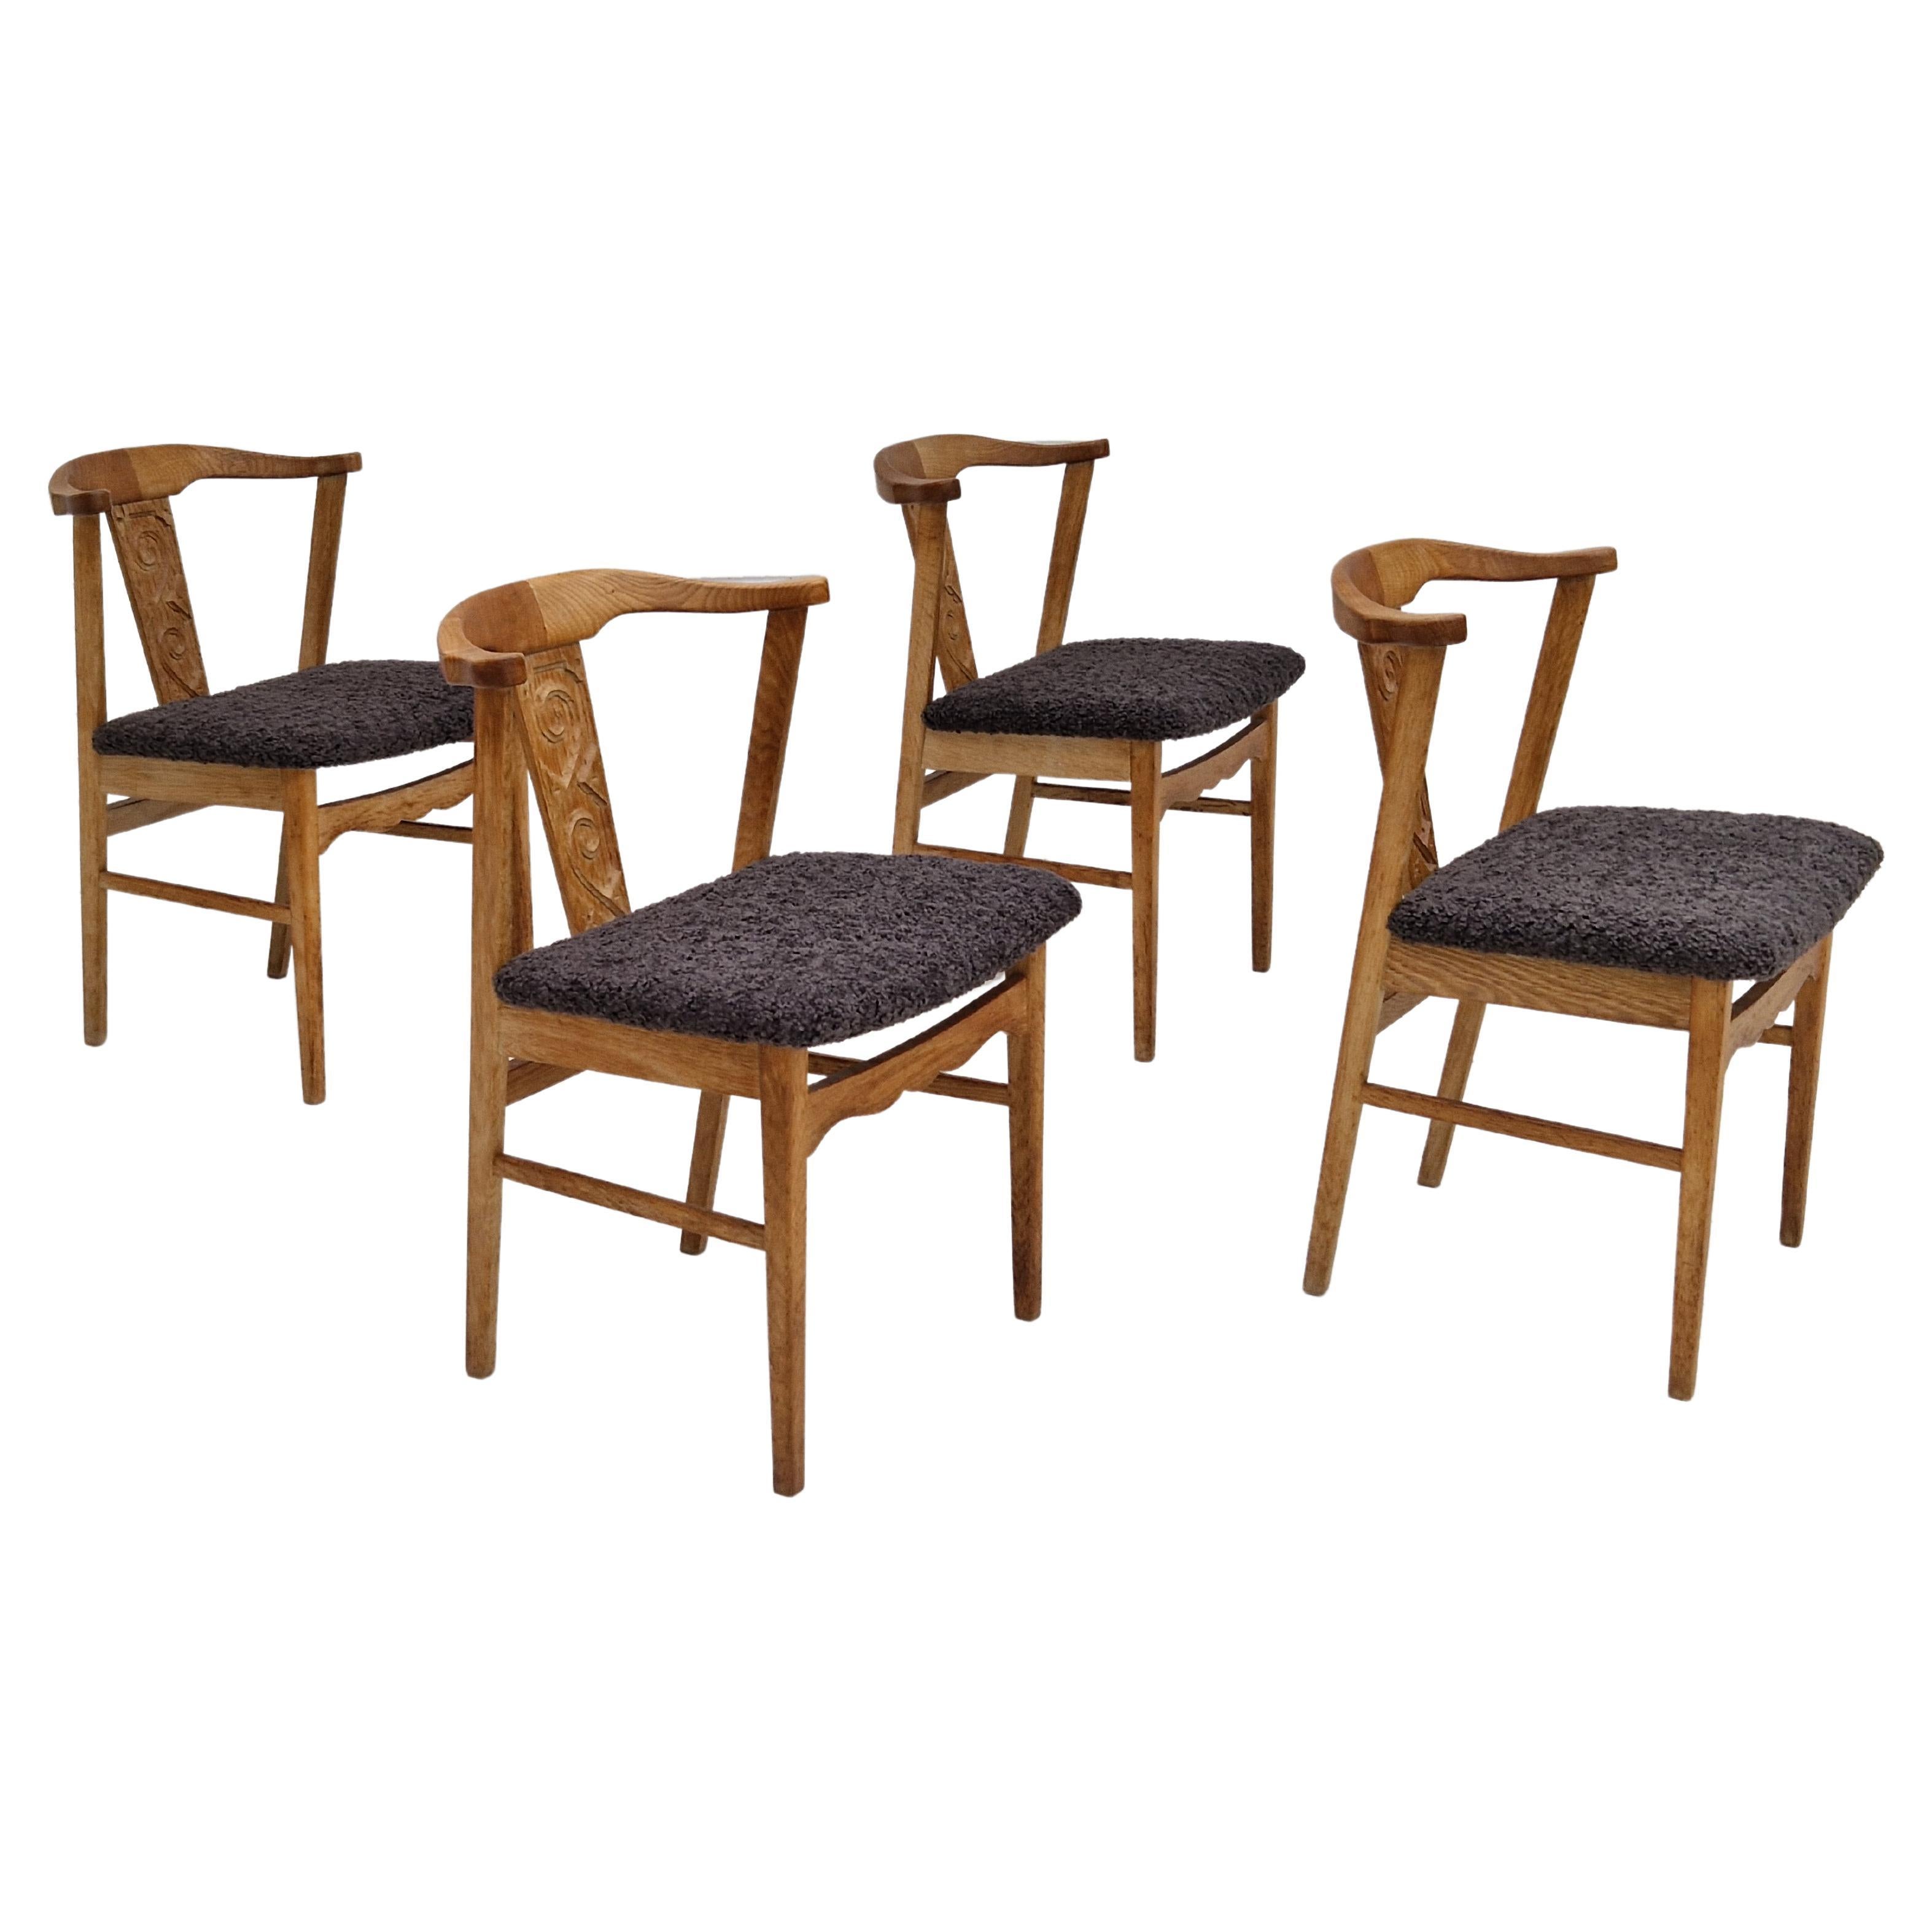 1960s, Danish Design, Set of 4 Dinning Chairs, Oak Wood, Reupholstered For Sale